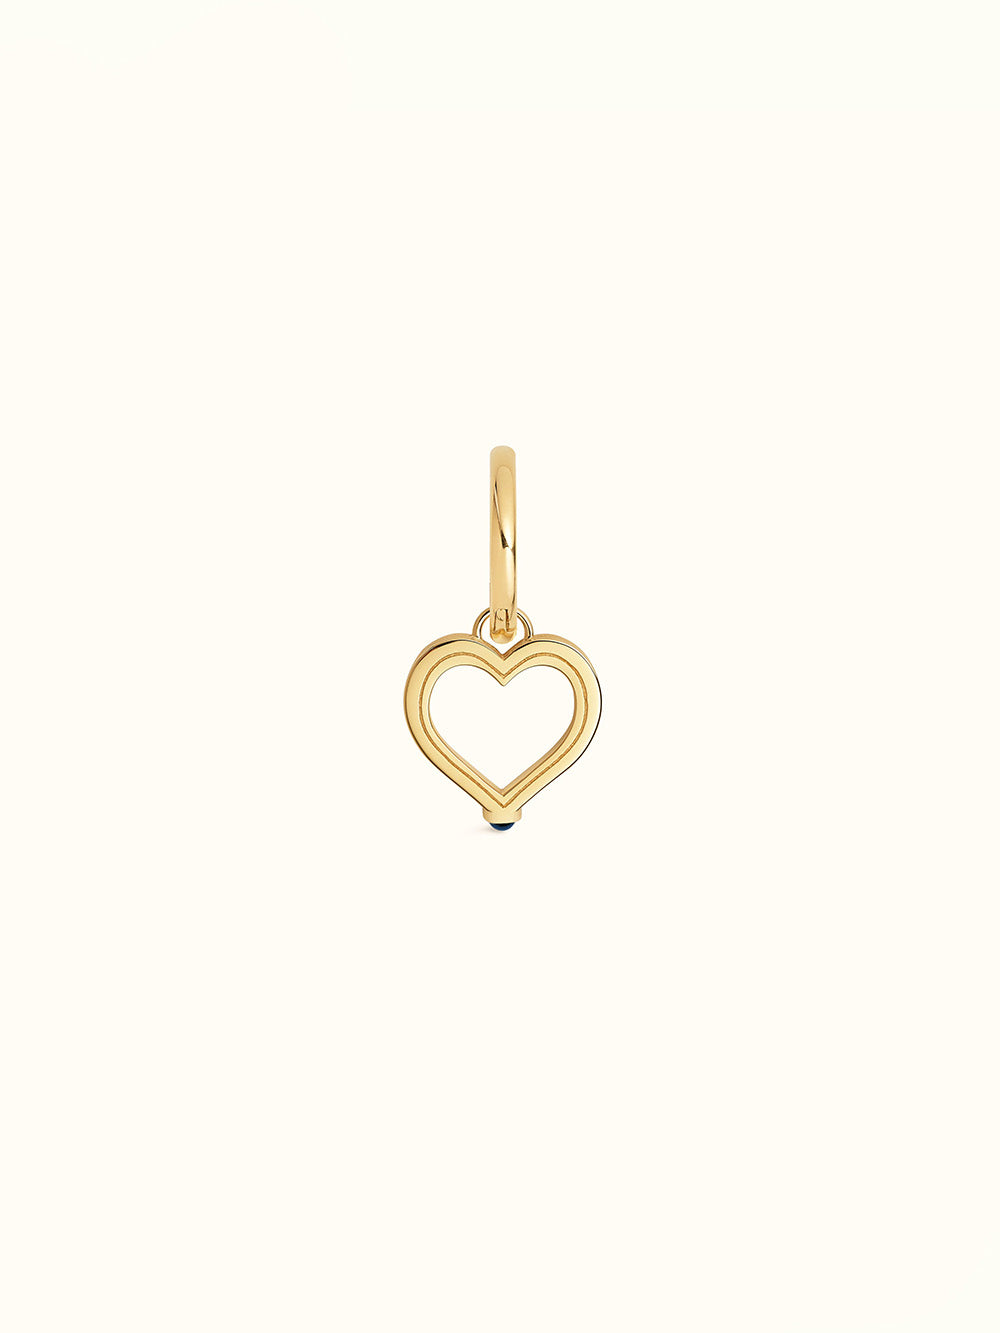 BABY CHARM HEART GOLD AND BLUE SAPPHIRE EARRING